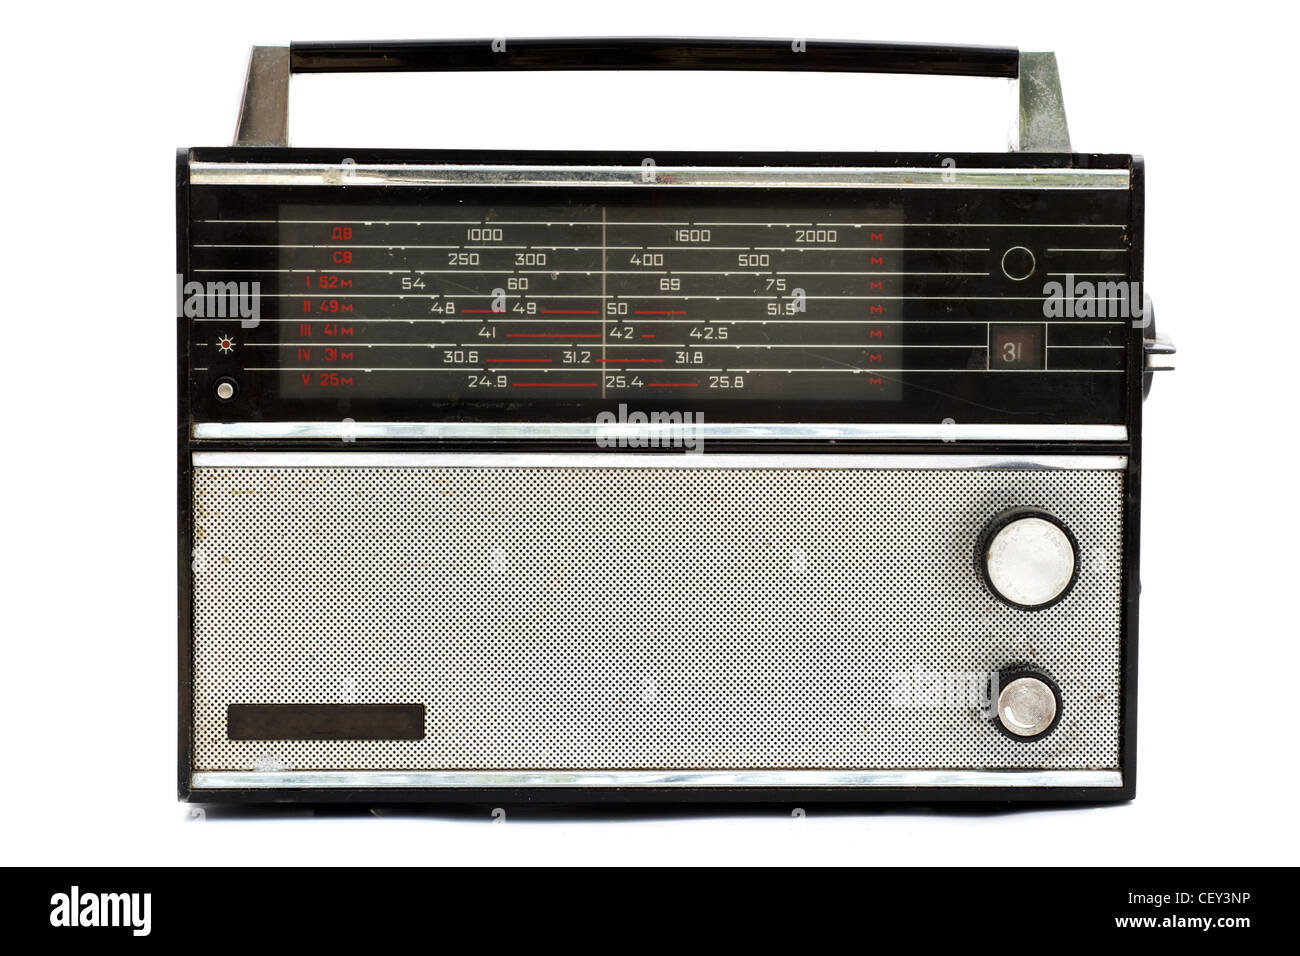 Russian Radio High Resolution Stock Photography and Images - Alamy